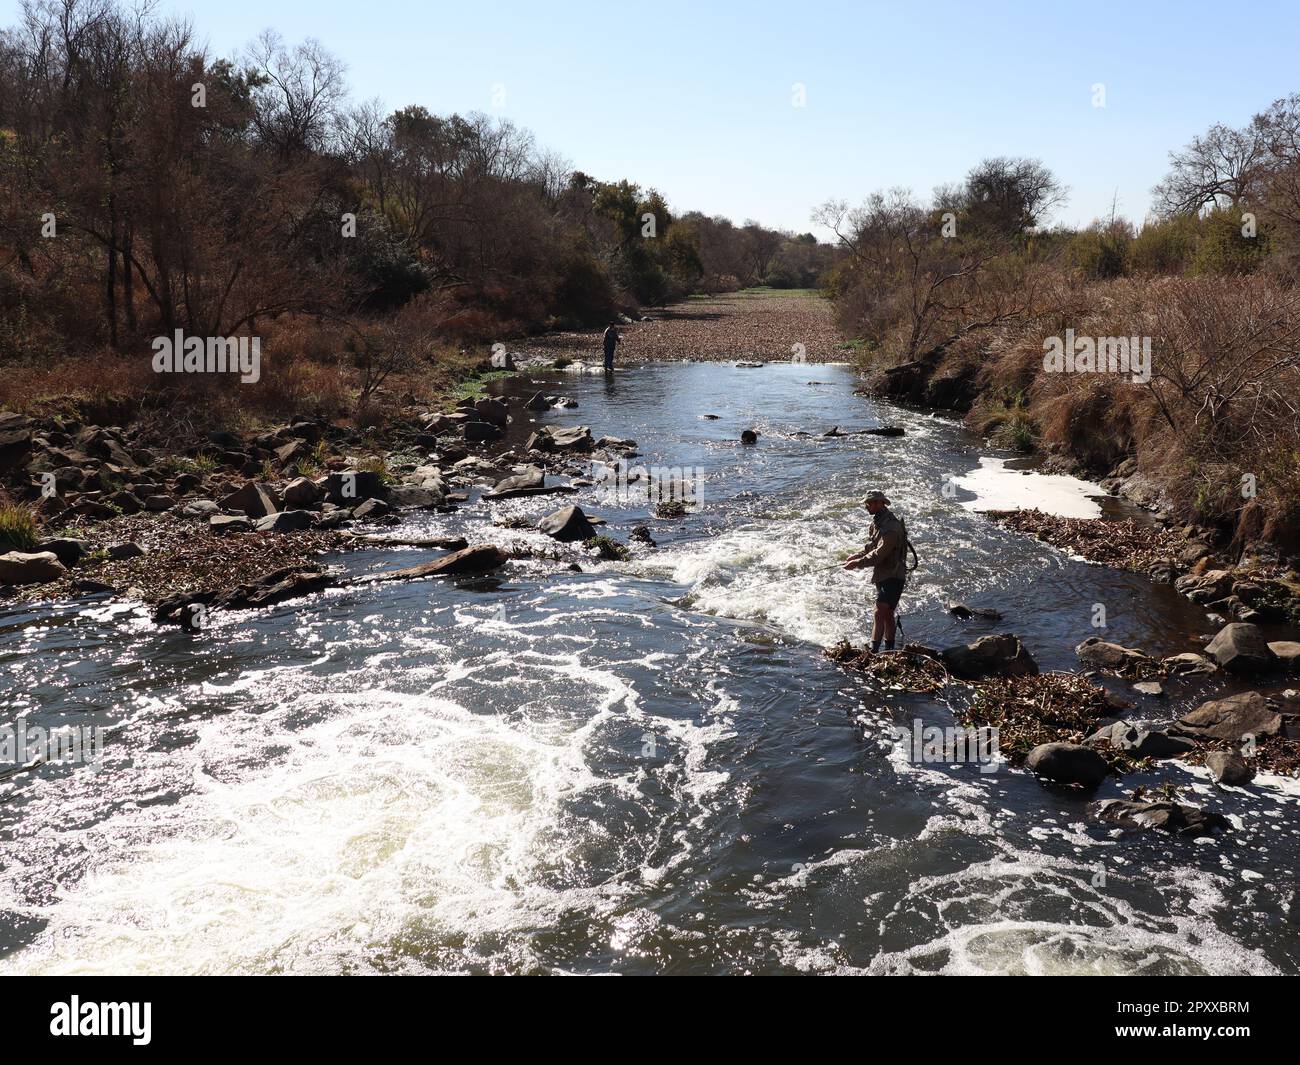 Picture of 2 men fishing in a raging portion of the crocodile river in South Africa , taken in winter when the ground and plants are drier and brown Stock Photo